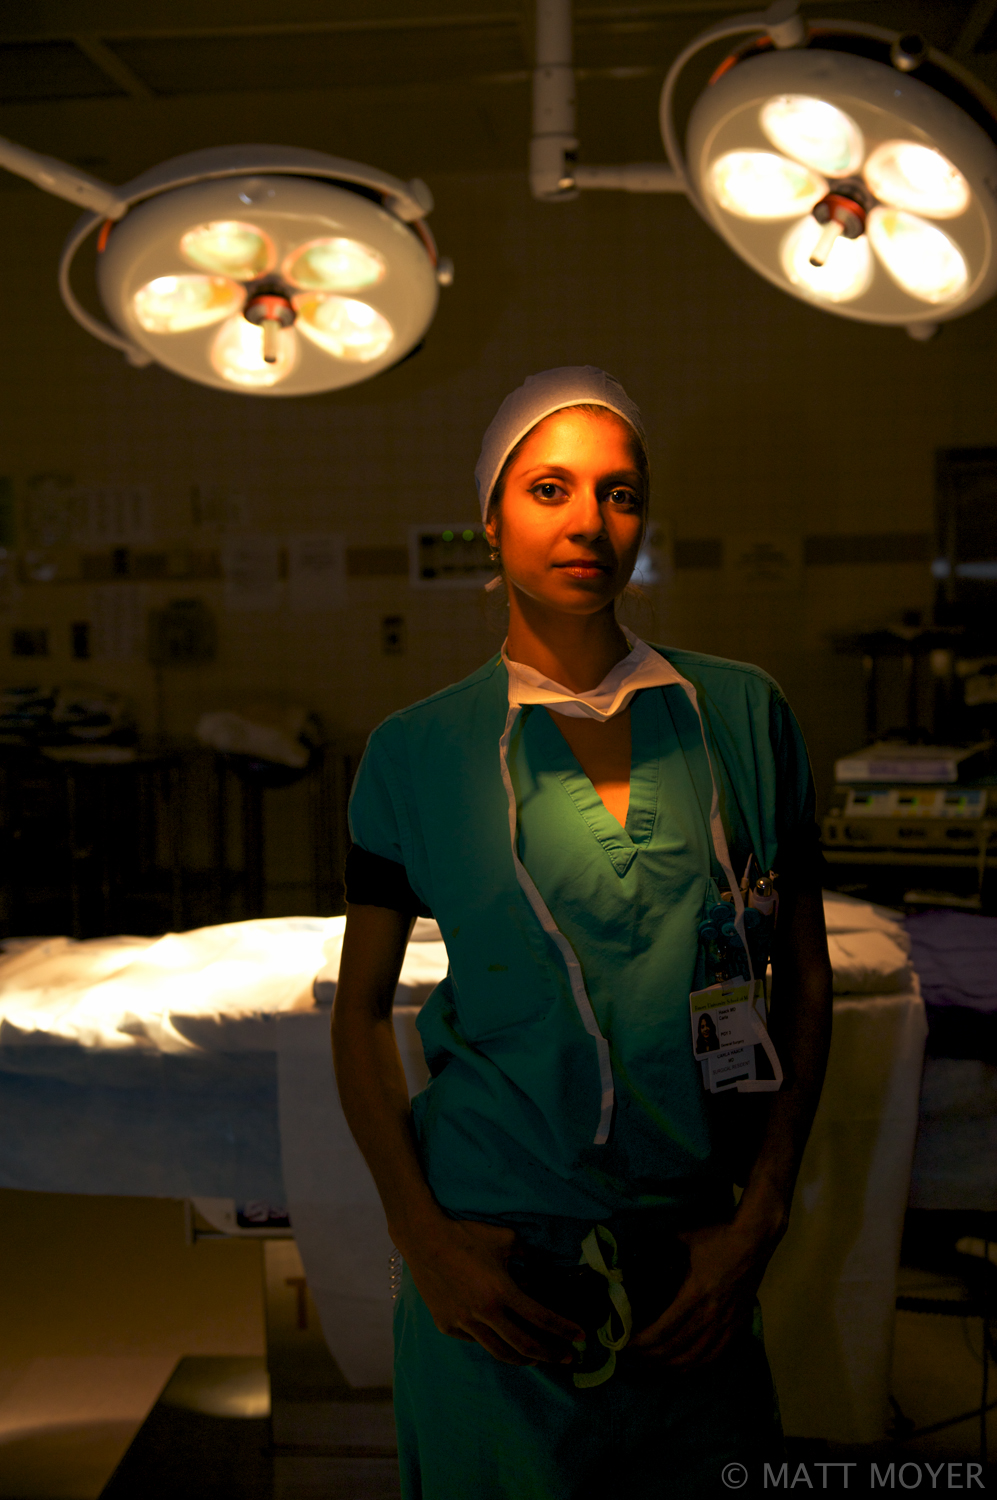  Dr. Carla Haack, a twenty five-year-old surgical resident, poses for a portrait in an operating room at Grady Memorial Hospital. 